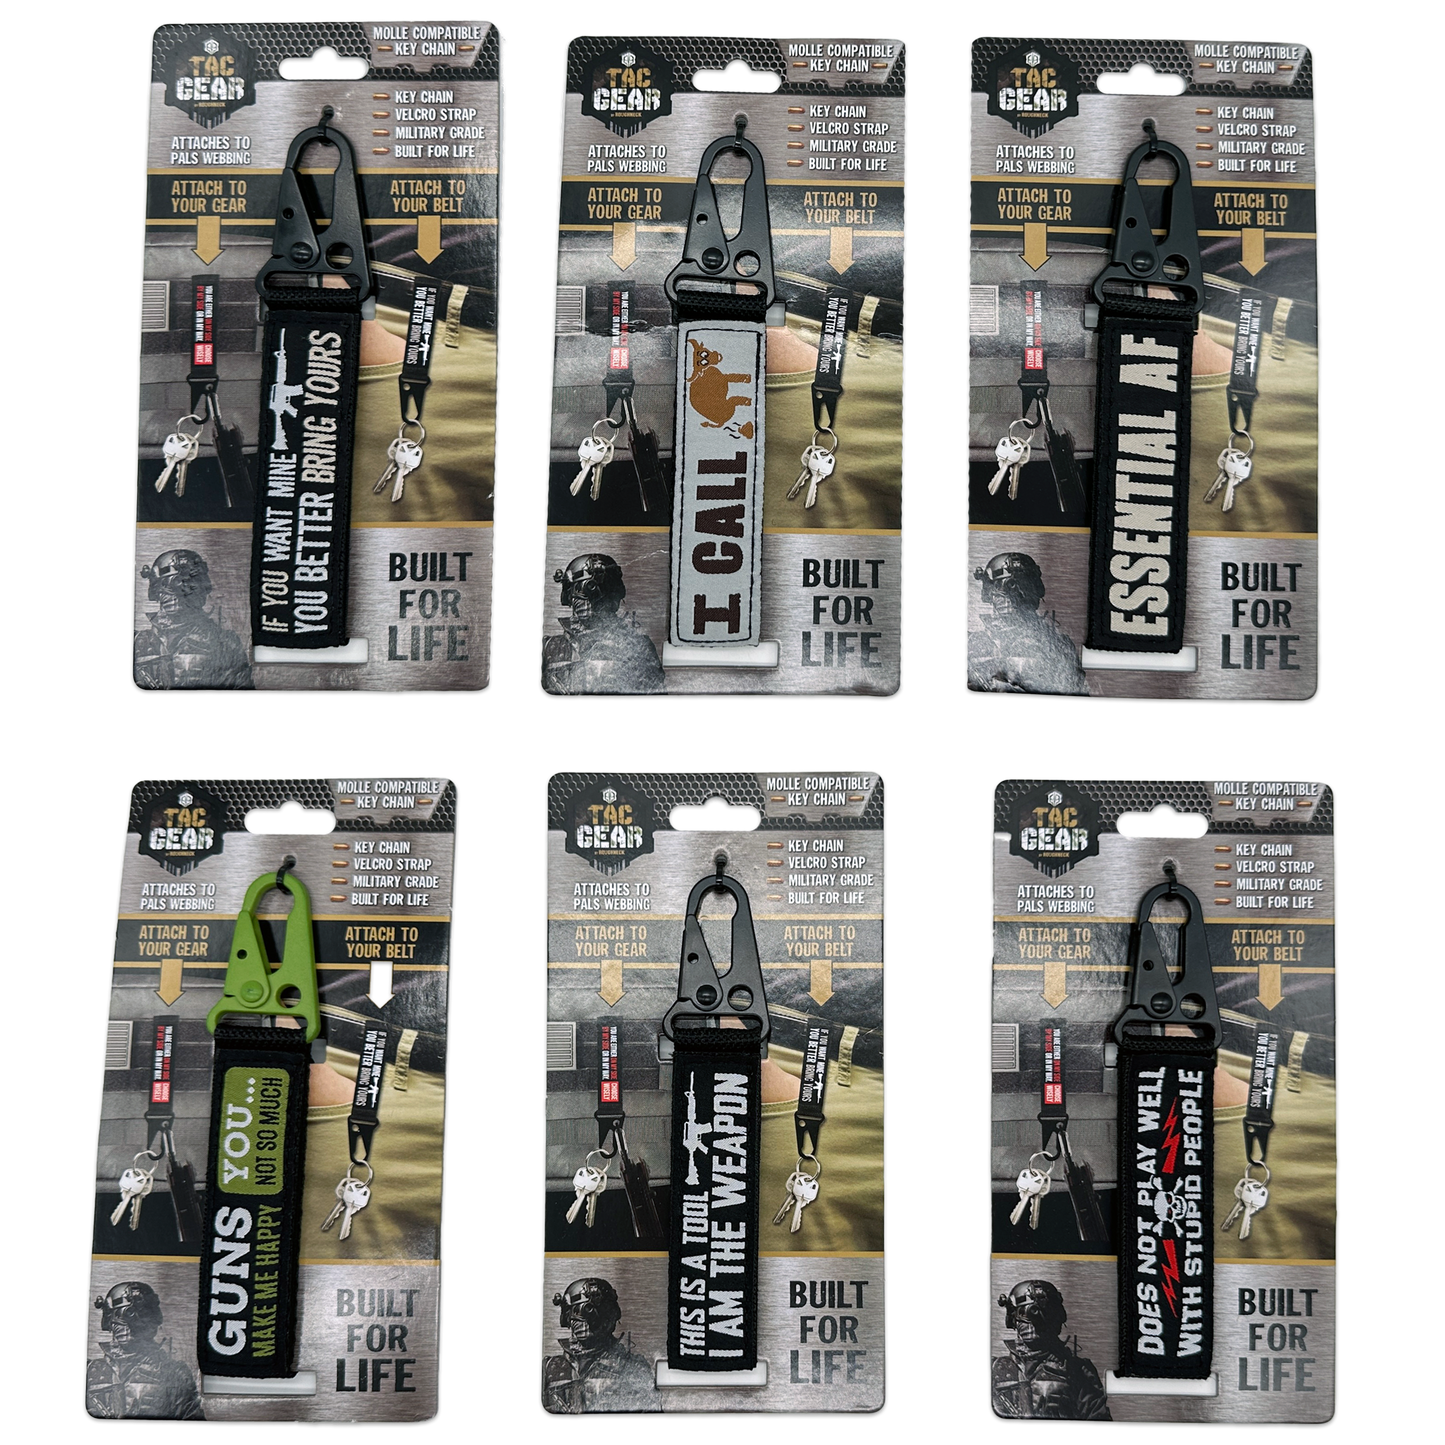 ITEM NUMBER 023722L TAC GEAR KEY CHAIN MOLLE STRAP - STORE SURPLUS NO DISPLAY 6 PIECES PER PACK